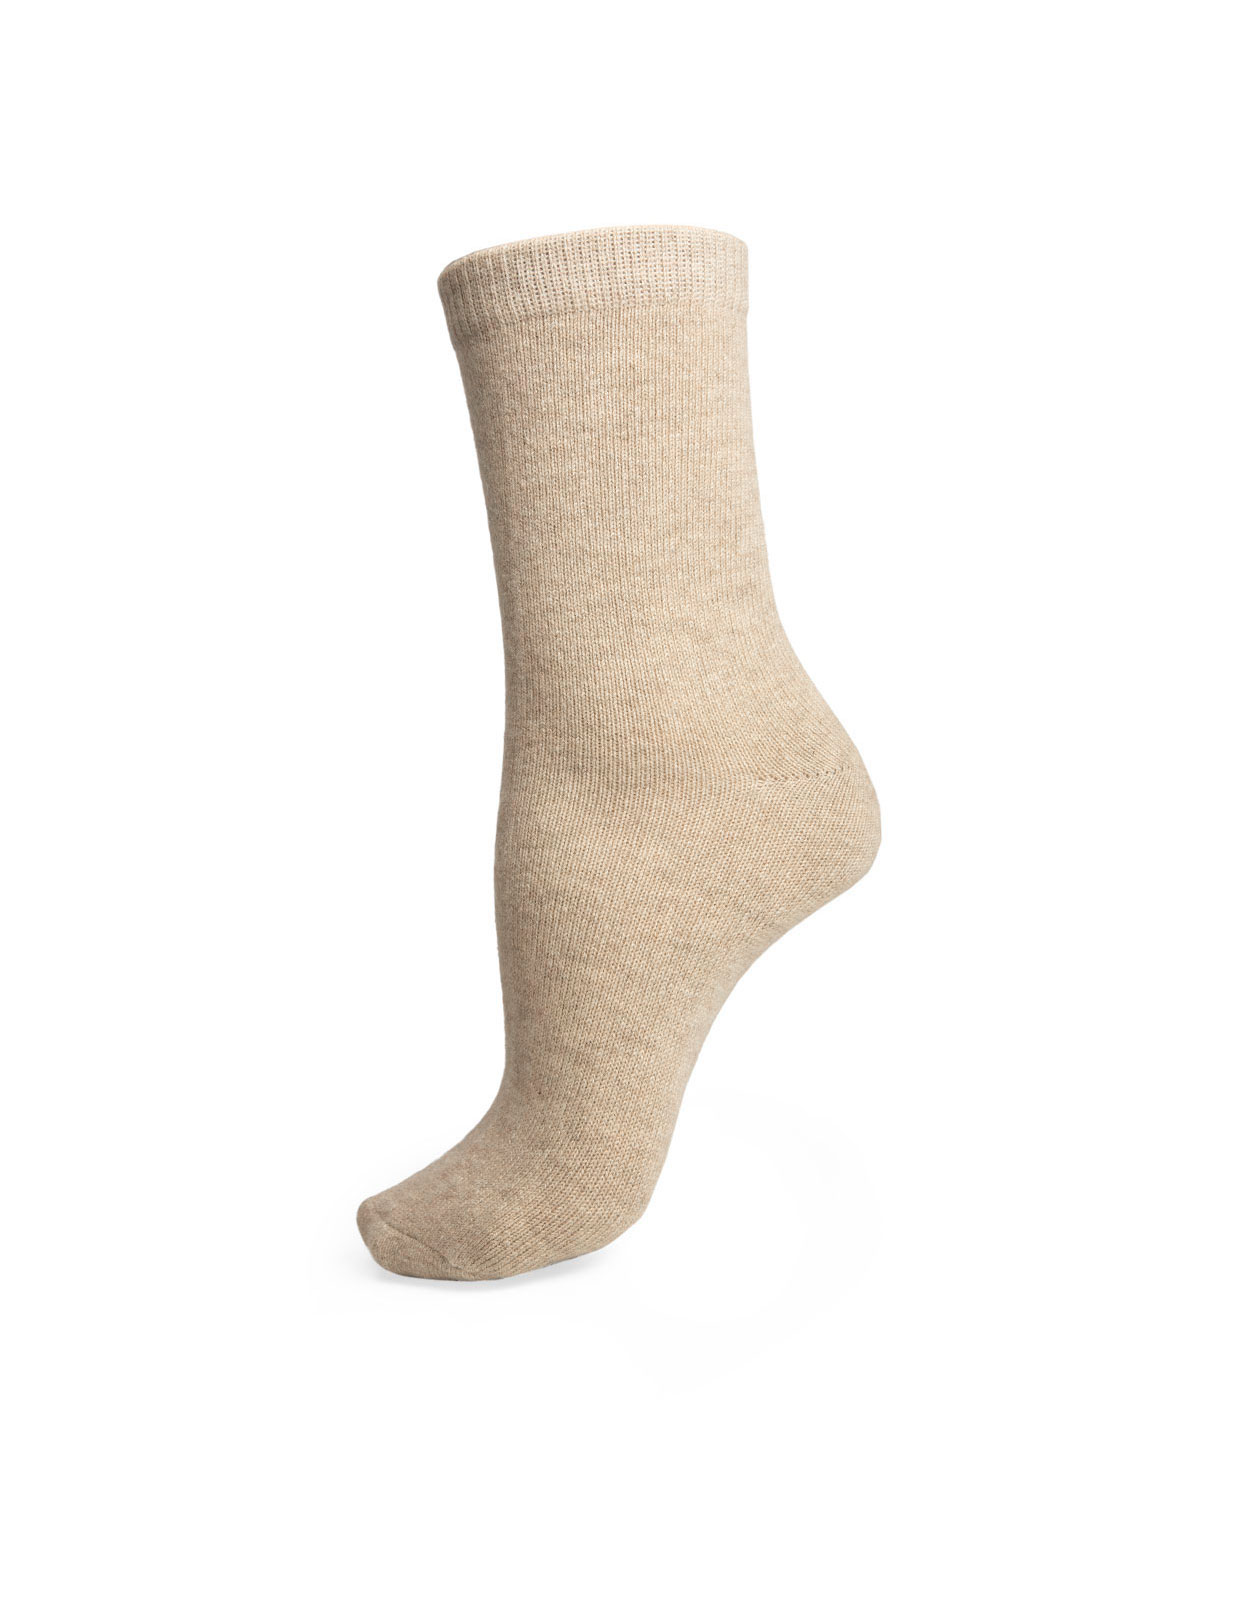 Loungesock Cashmere Light Sand